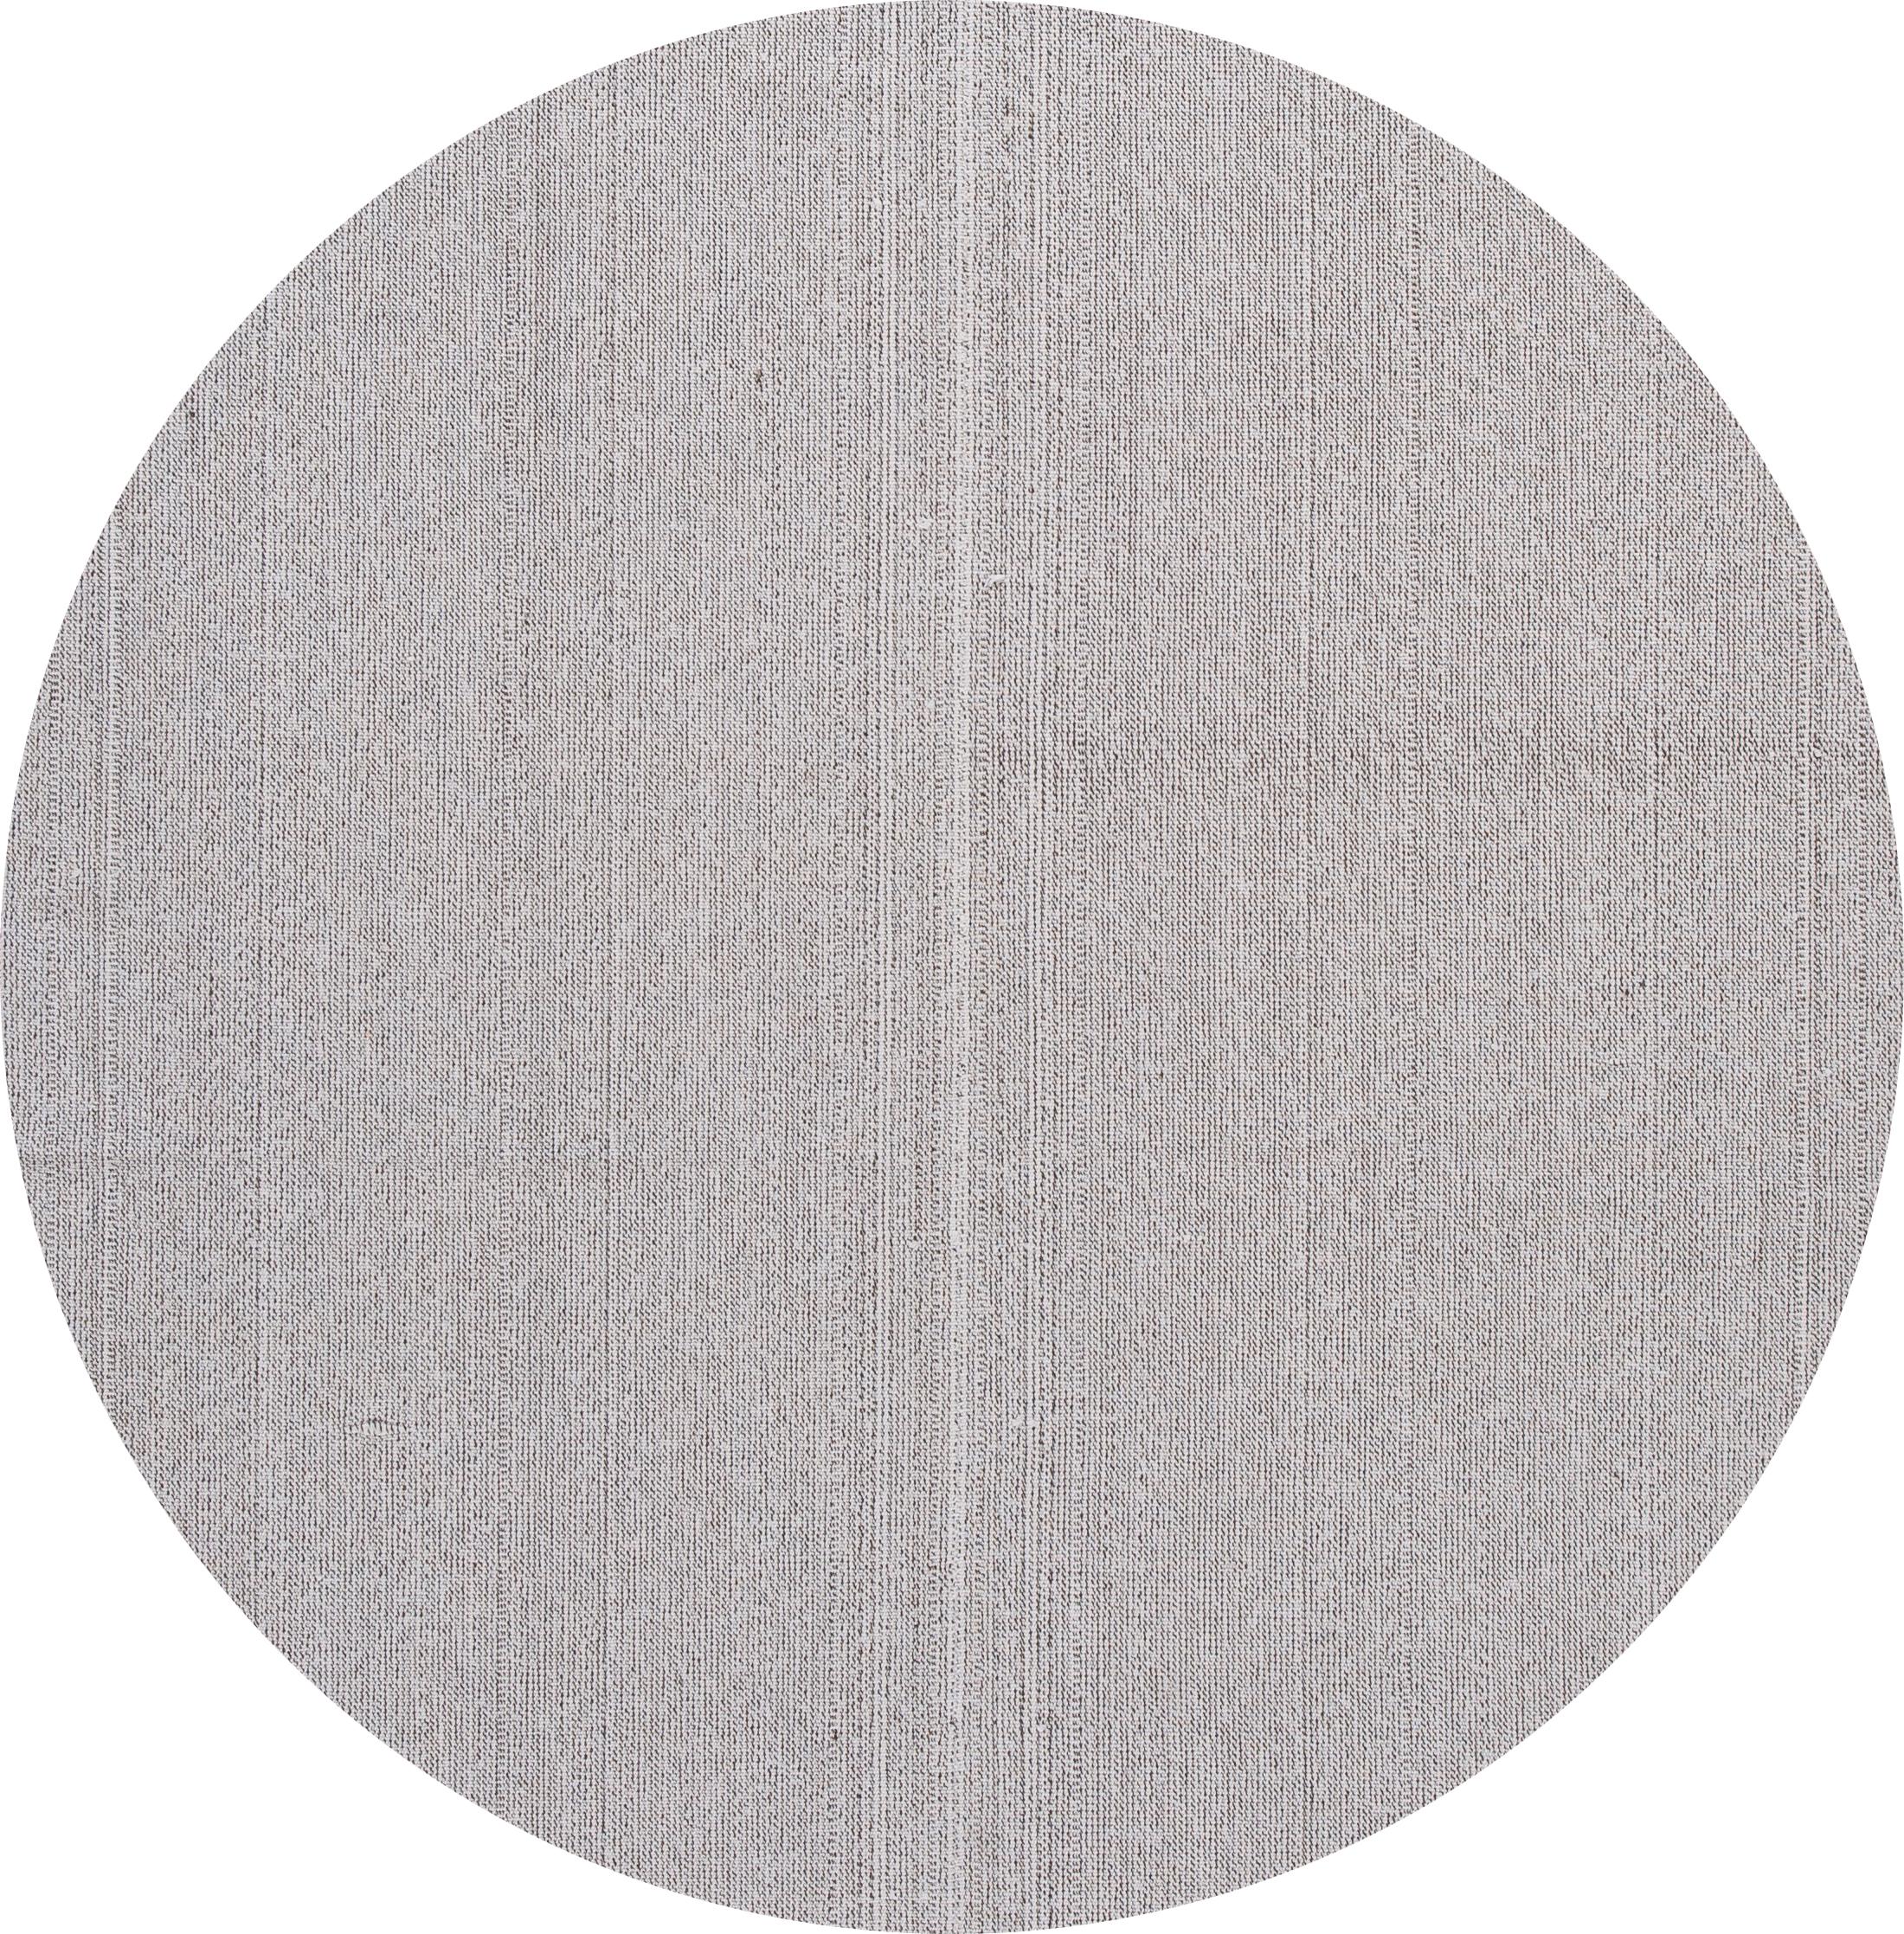 21st century contemporary flat-weave rug with an all-over gray motif. This piece has Fine details, great colors, and a beautiful design. It would be the perfect addition to your home. 

This rug measures 6'7